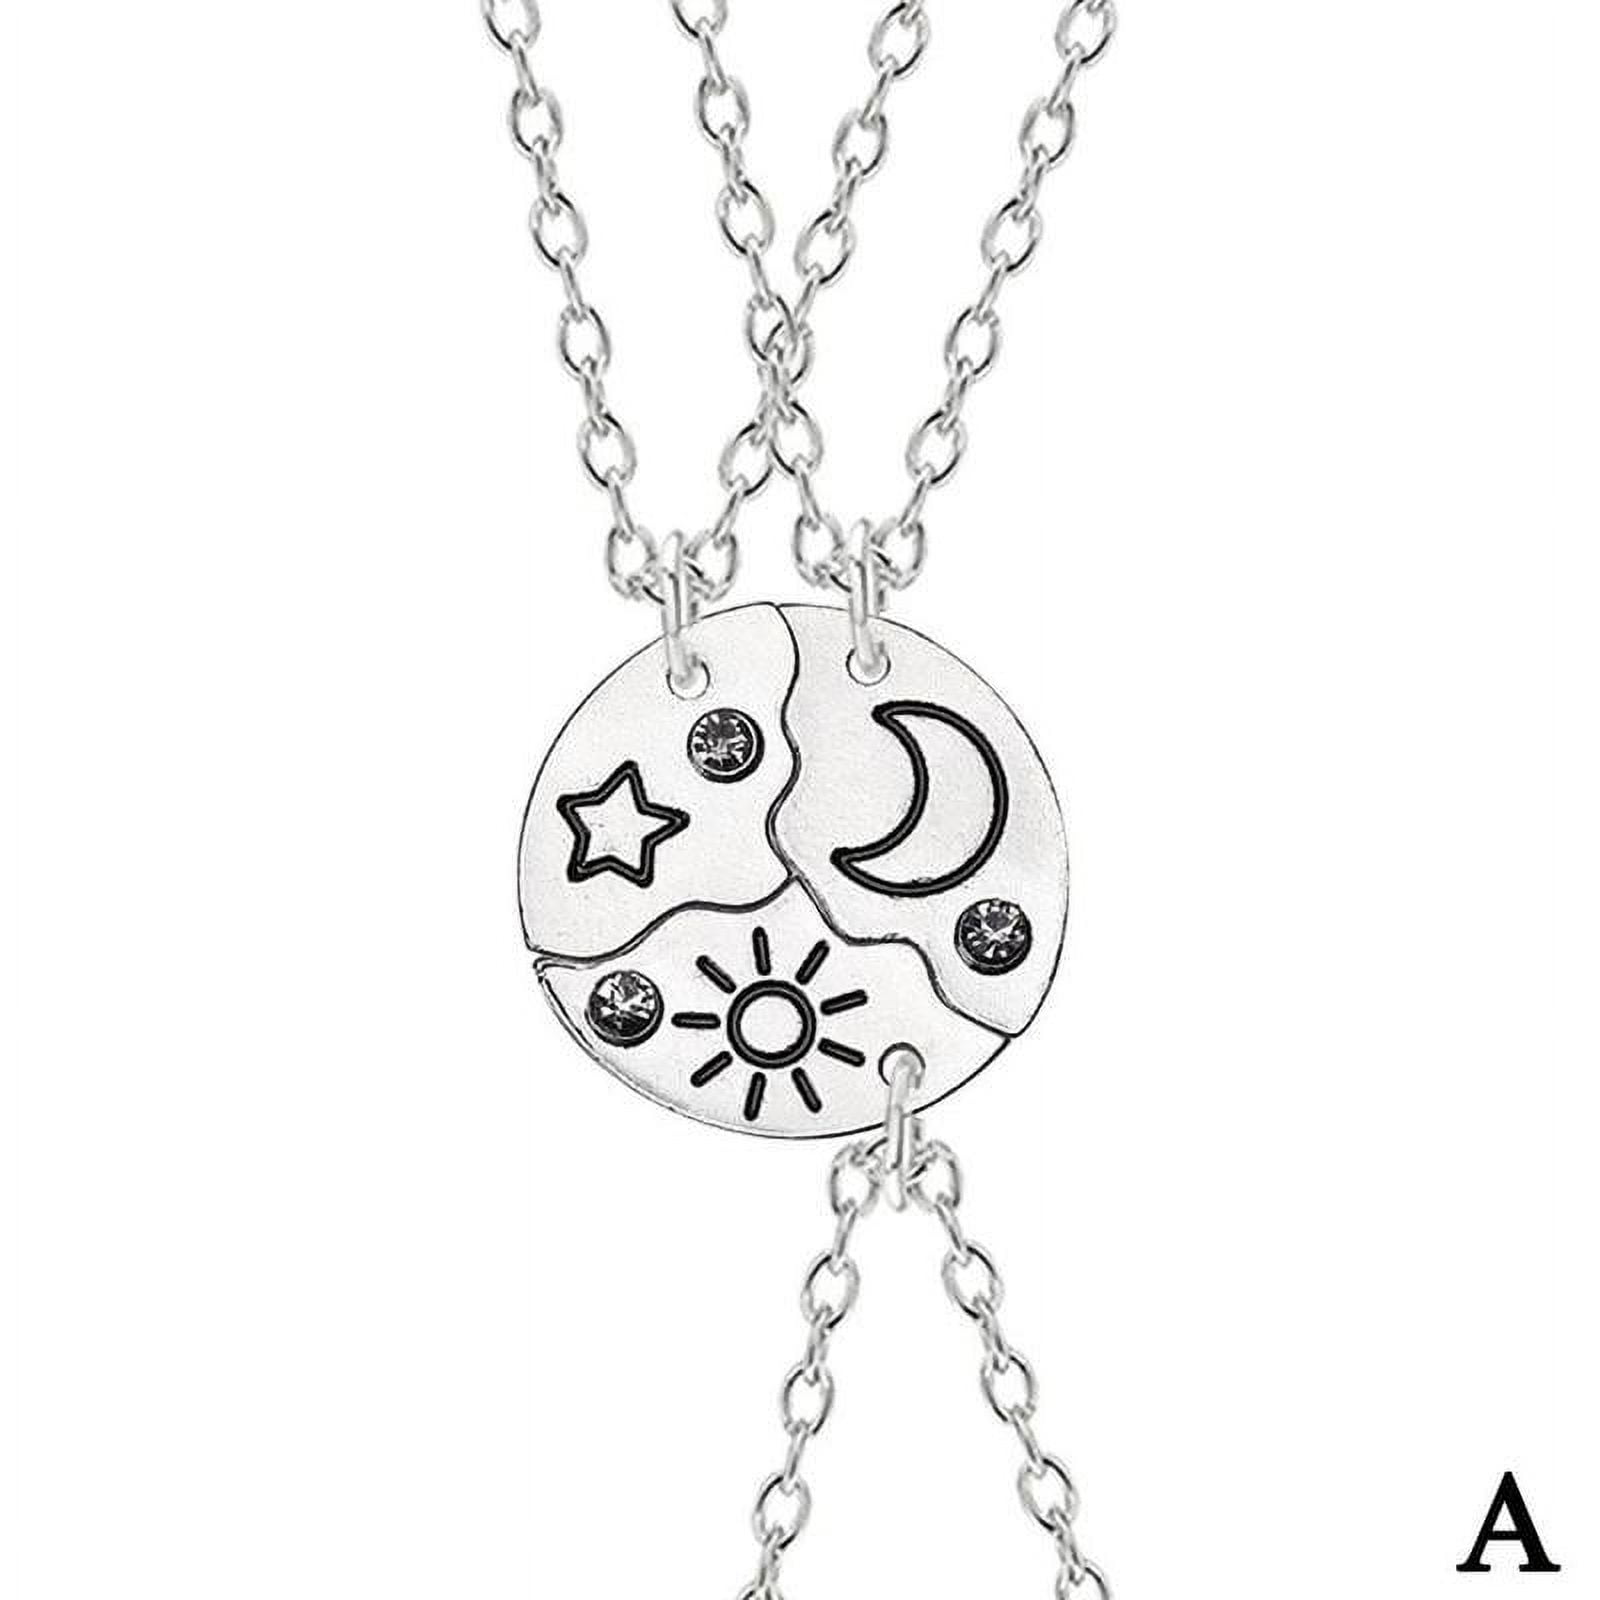 Buy Dainty Silver Sun, Moon or Star Necklace, Minimalist Jewelry,  Friendship, Sisters Necklaces Online in India - Etsy